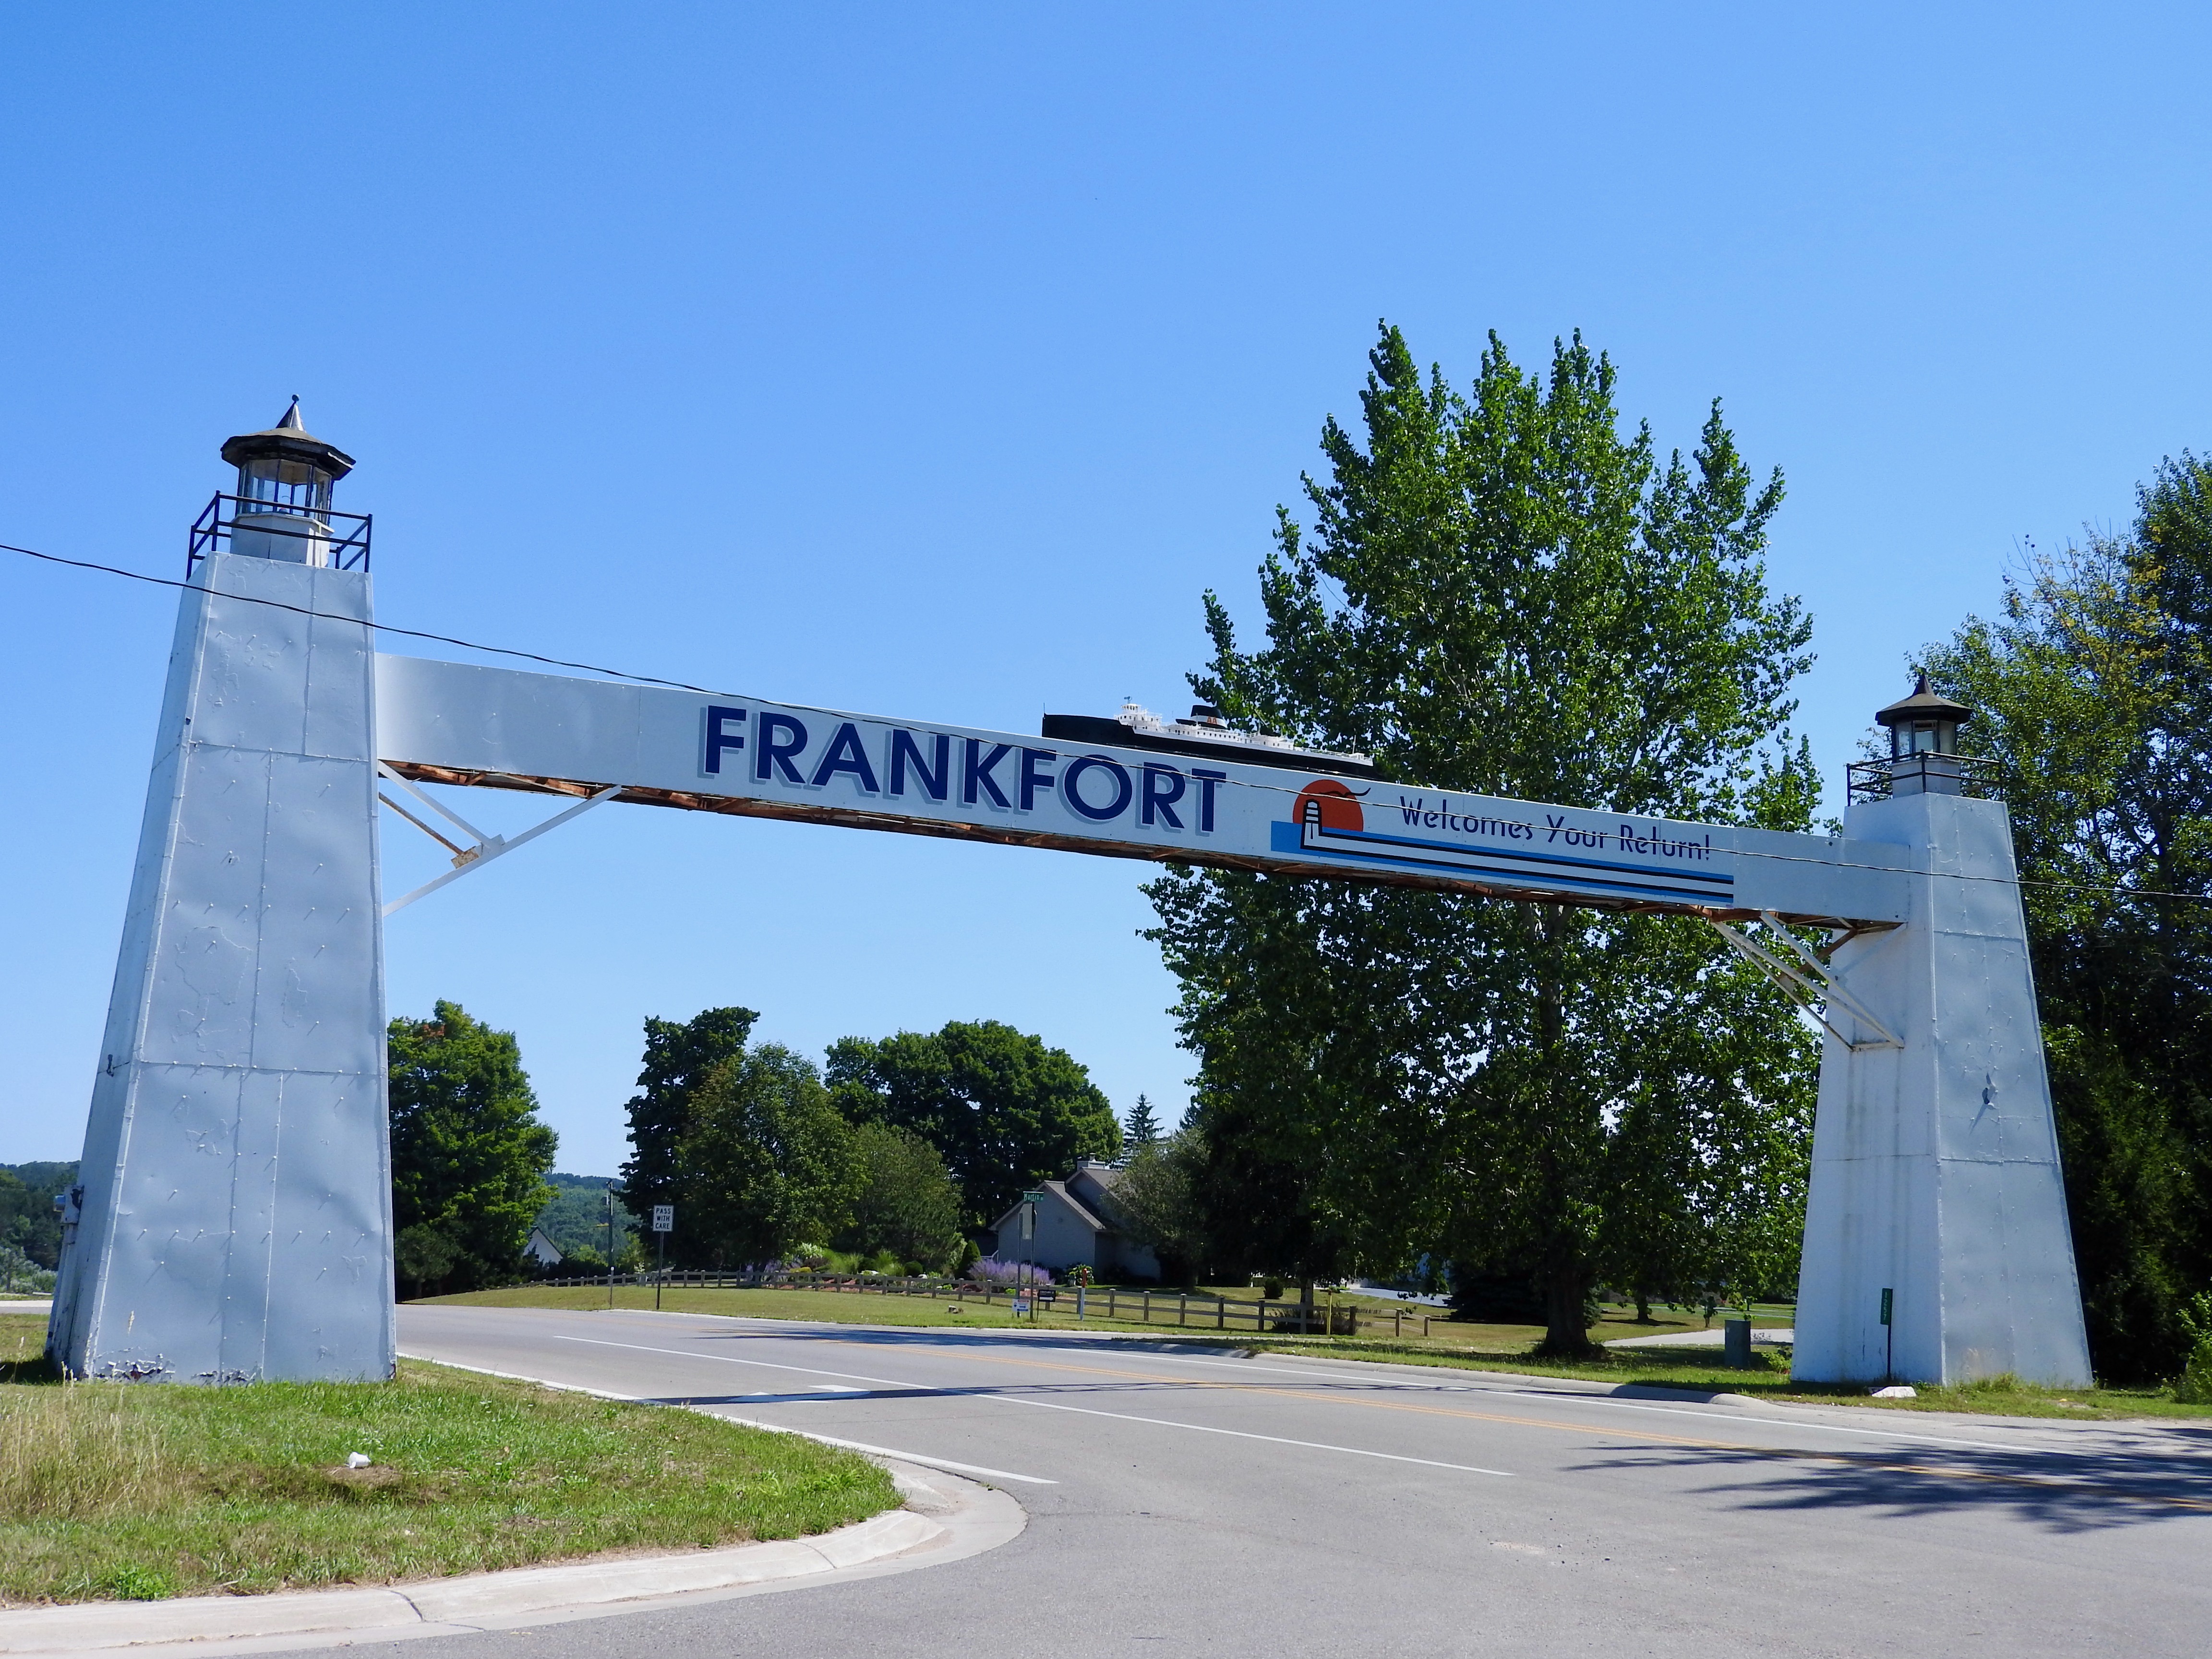 Frankfort, Michigan welcome sign. My own photo.